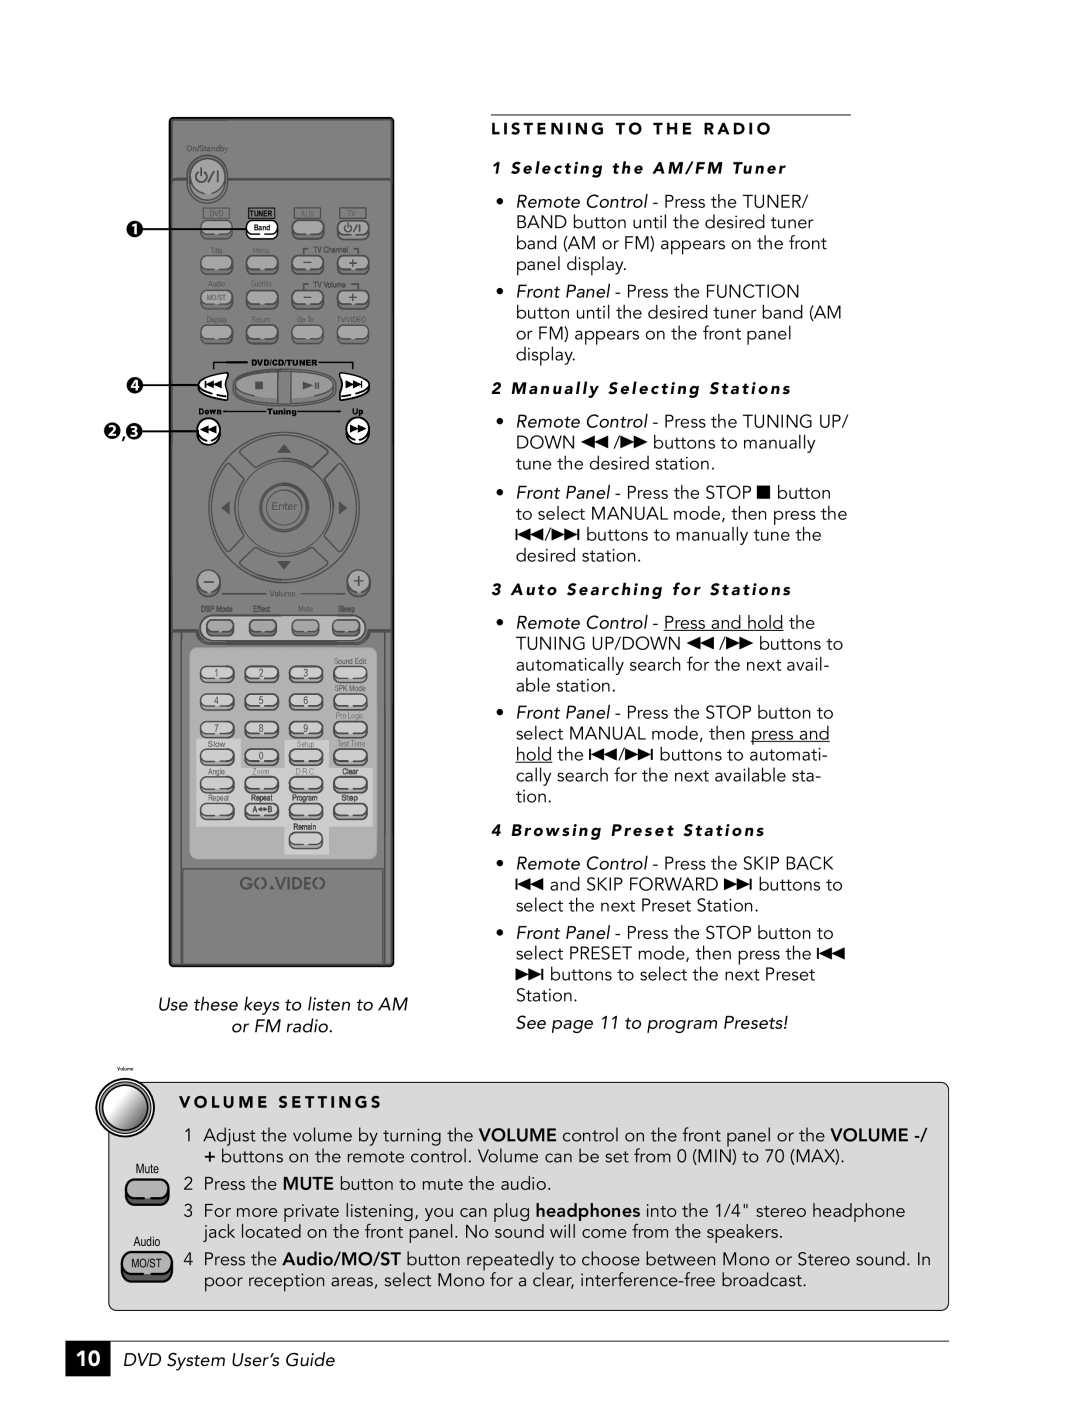 GoVideo DHT7100 manual Use these keys to listen to AM or FM radio, See page 11 to program Presets, DVD System User’s Guide 